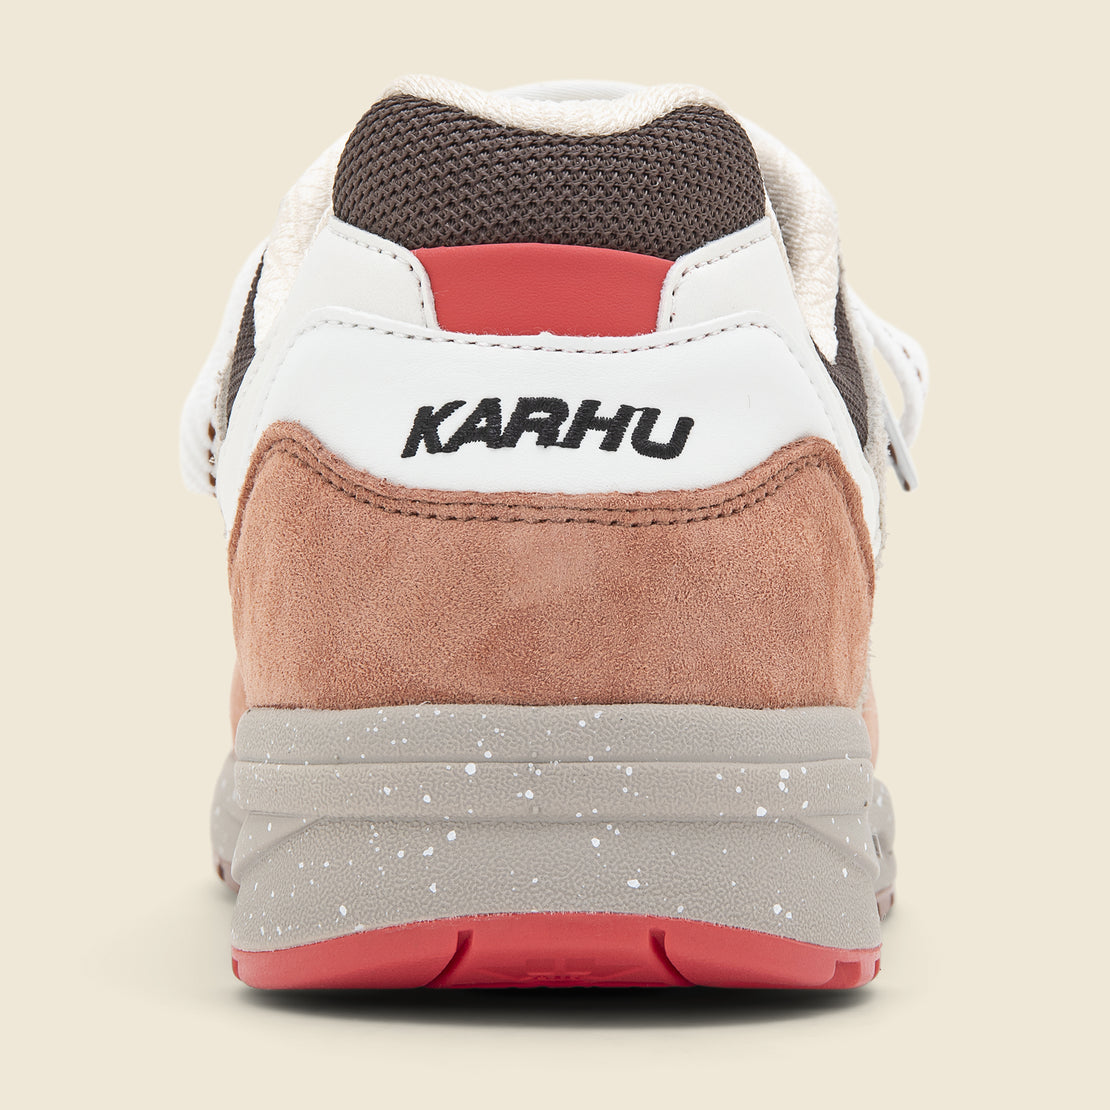 Legacy 96 Sneaker - Cork/Chocolate Torte - Karhu - STAG Provisions - Shoes - Athletic